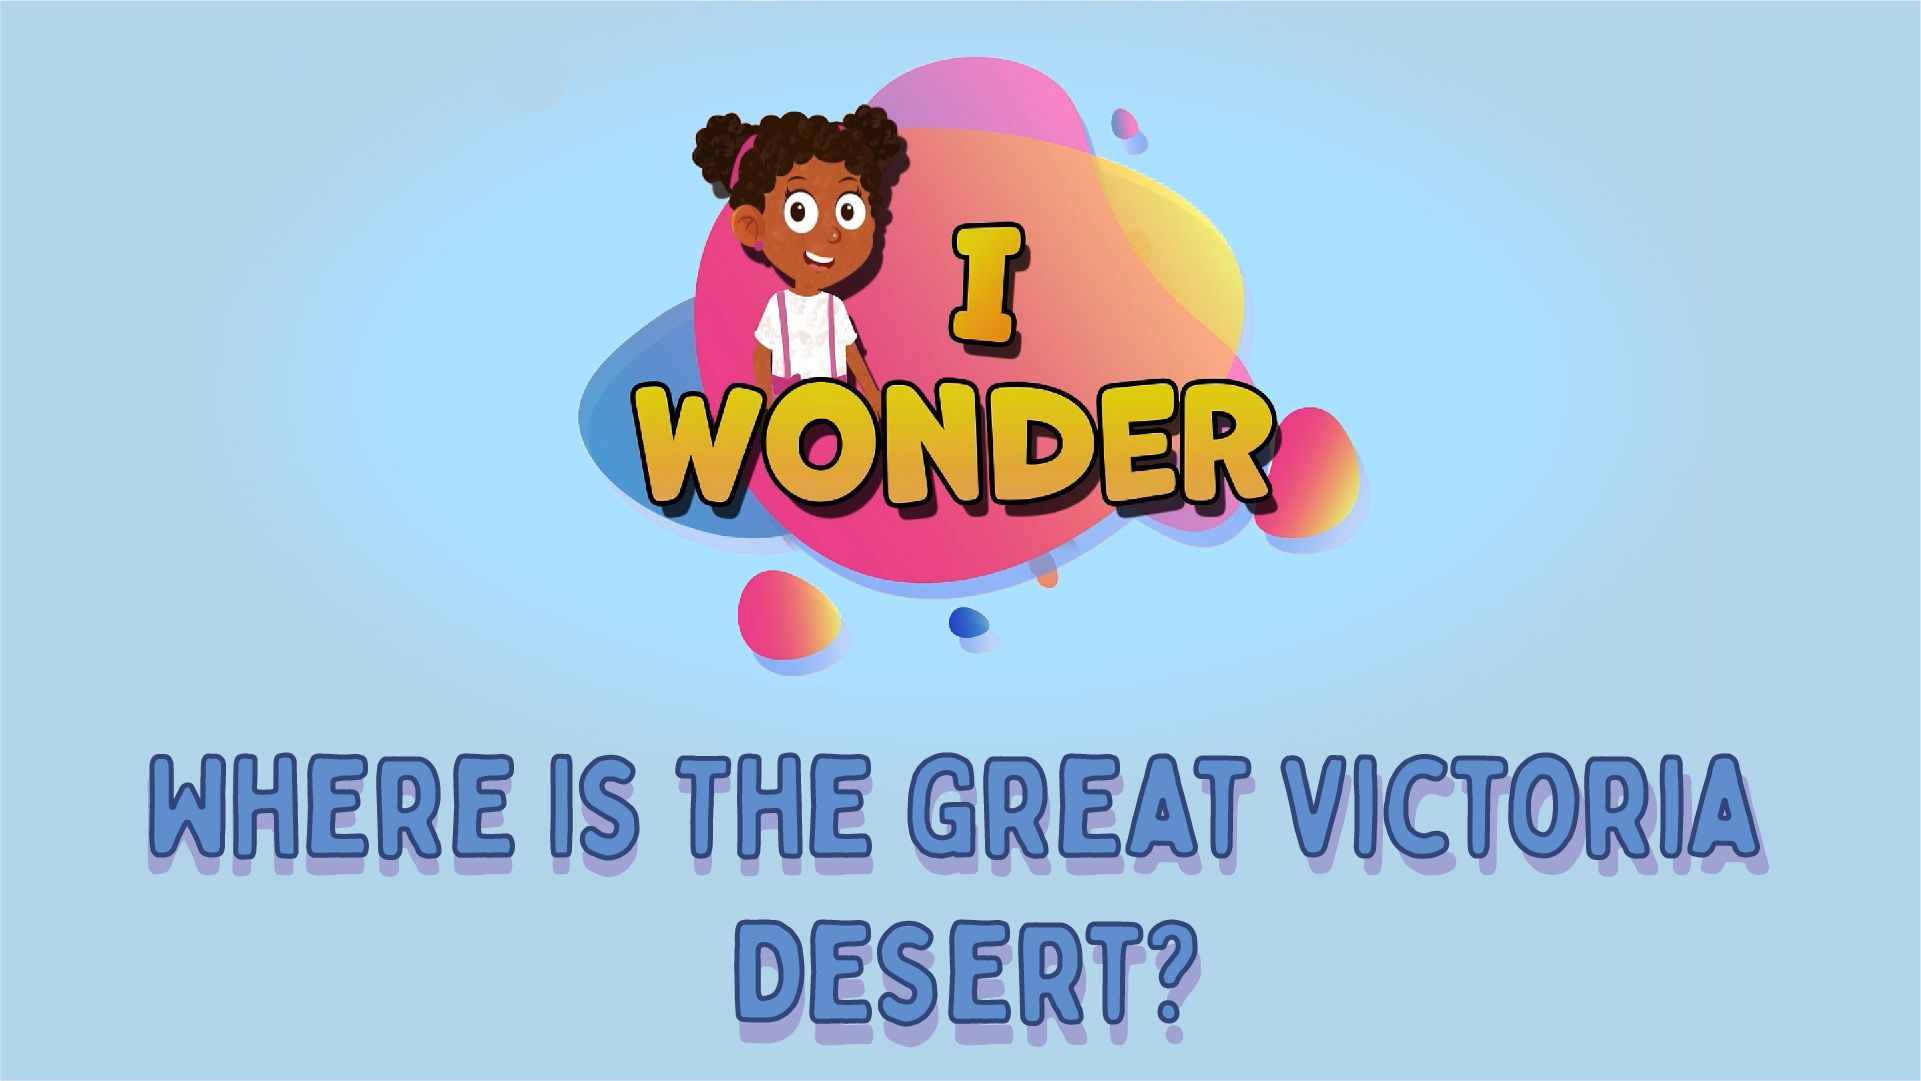 Where Is The Great Victoria Desert?